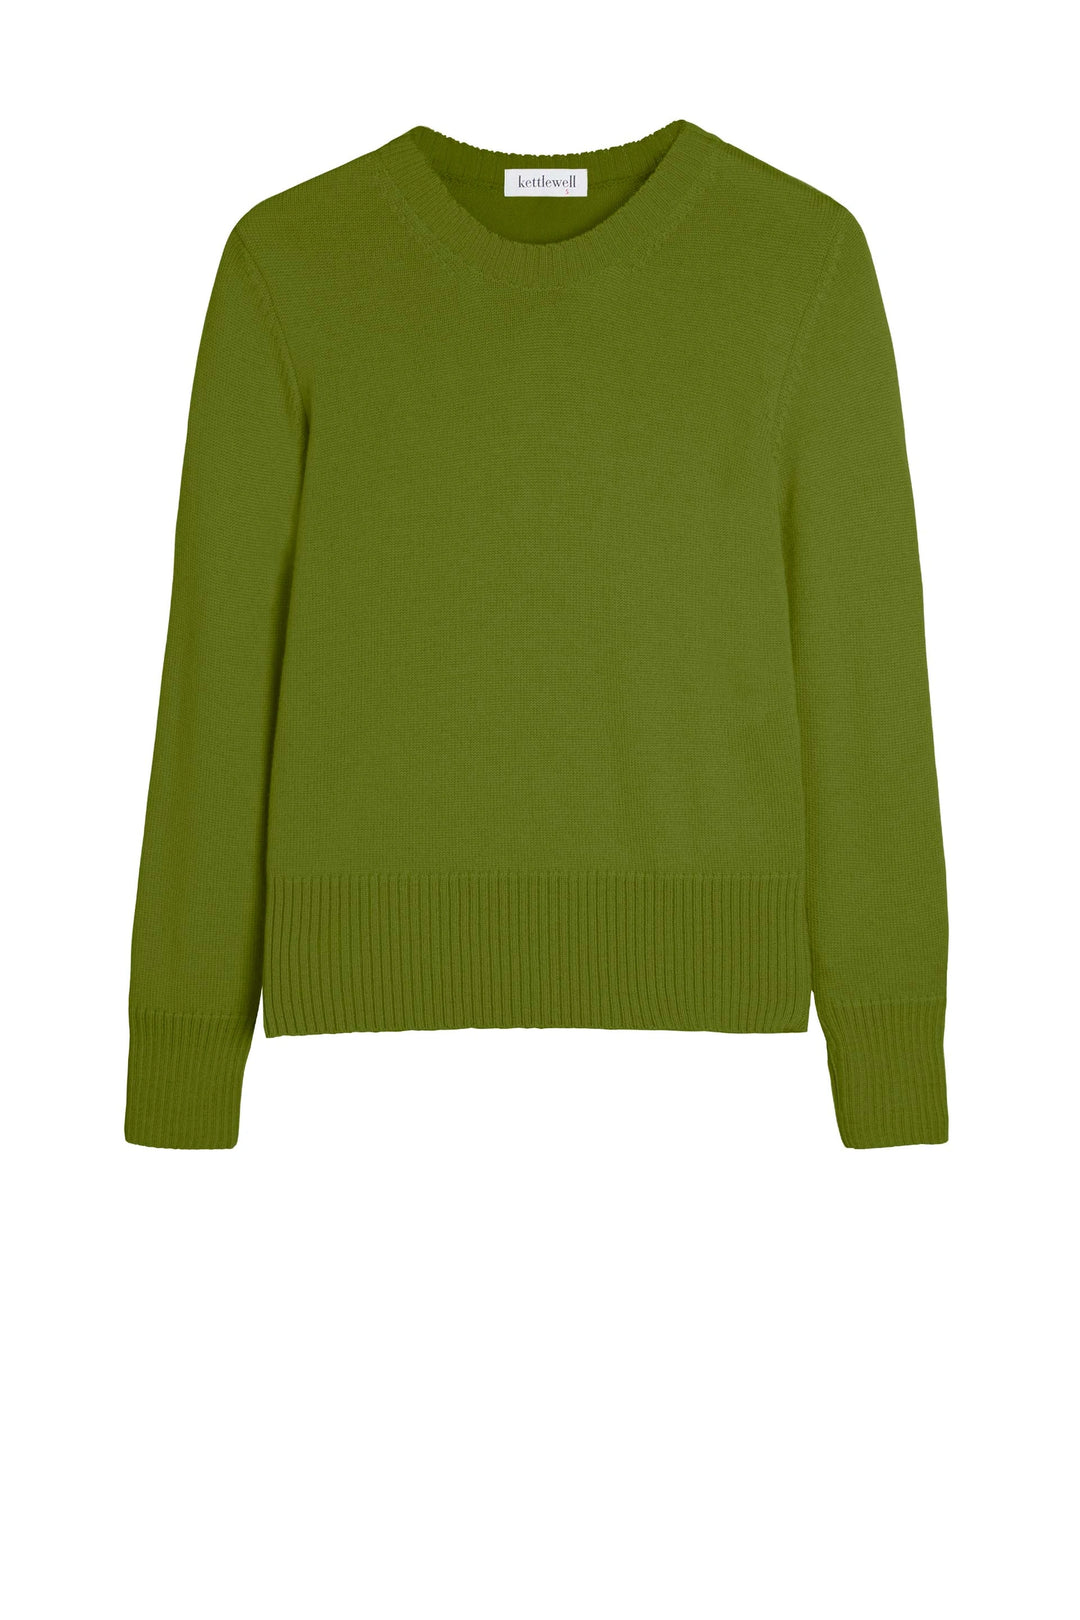 Kettlewell Connie Sweater - Moss (AUTUMN)